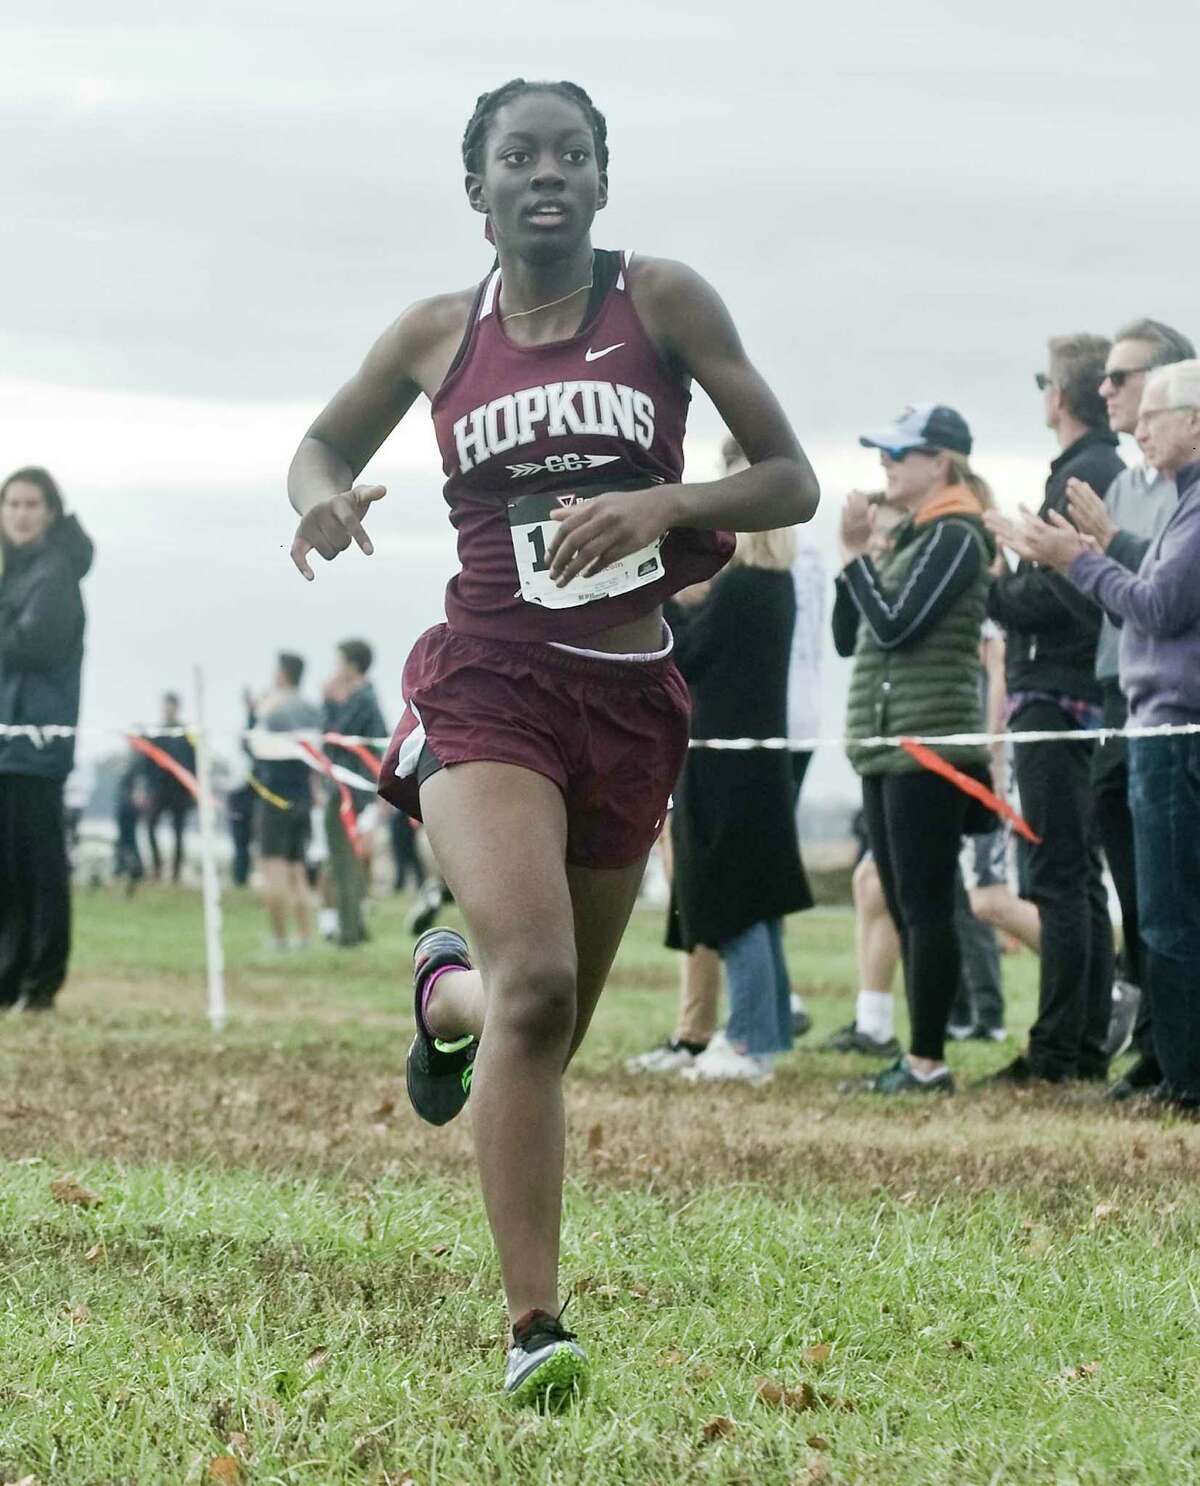 Nana Dondorful-Amos, of Hopkins School, in the FAA Girls Cross Country Championships at Sherwood Island in Westport. Monday, Oct. 28, 2019